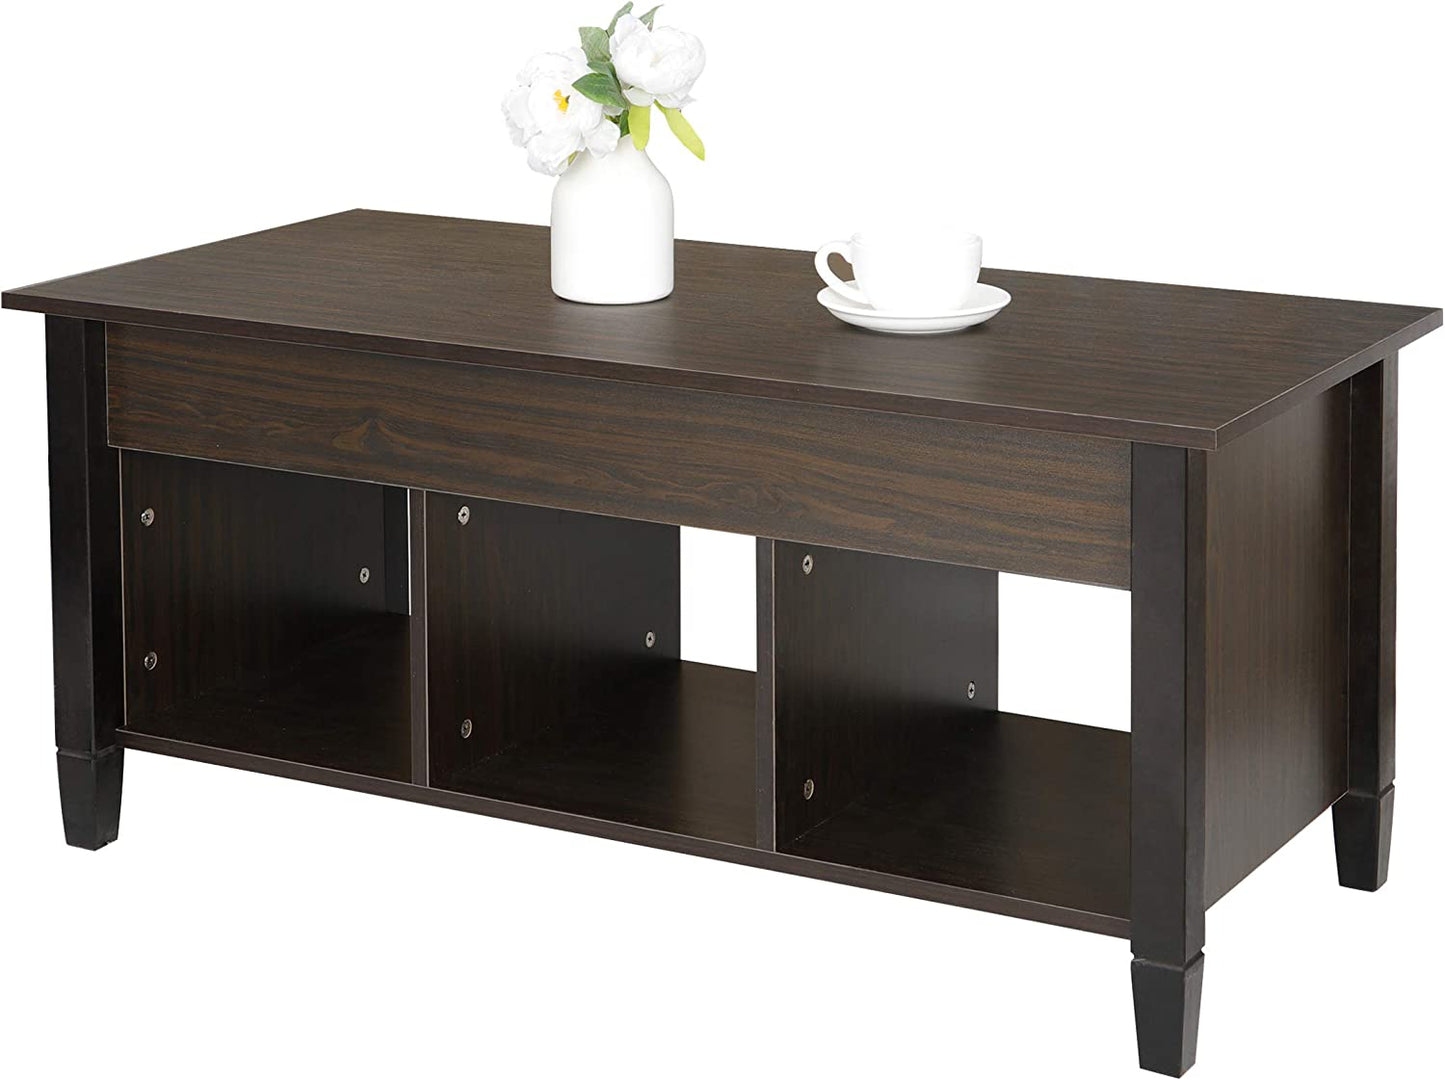 Lift Top Coffee Table with Hidden Compartment and 3 Divided Shelves Modern Furniture for Home, Living Room, Décor